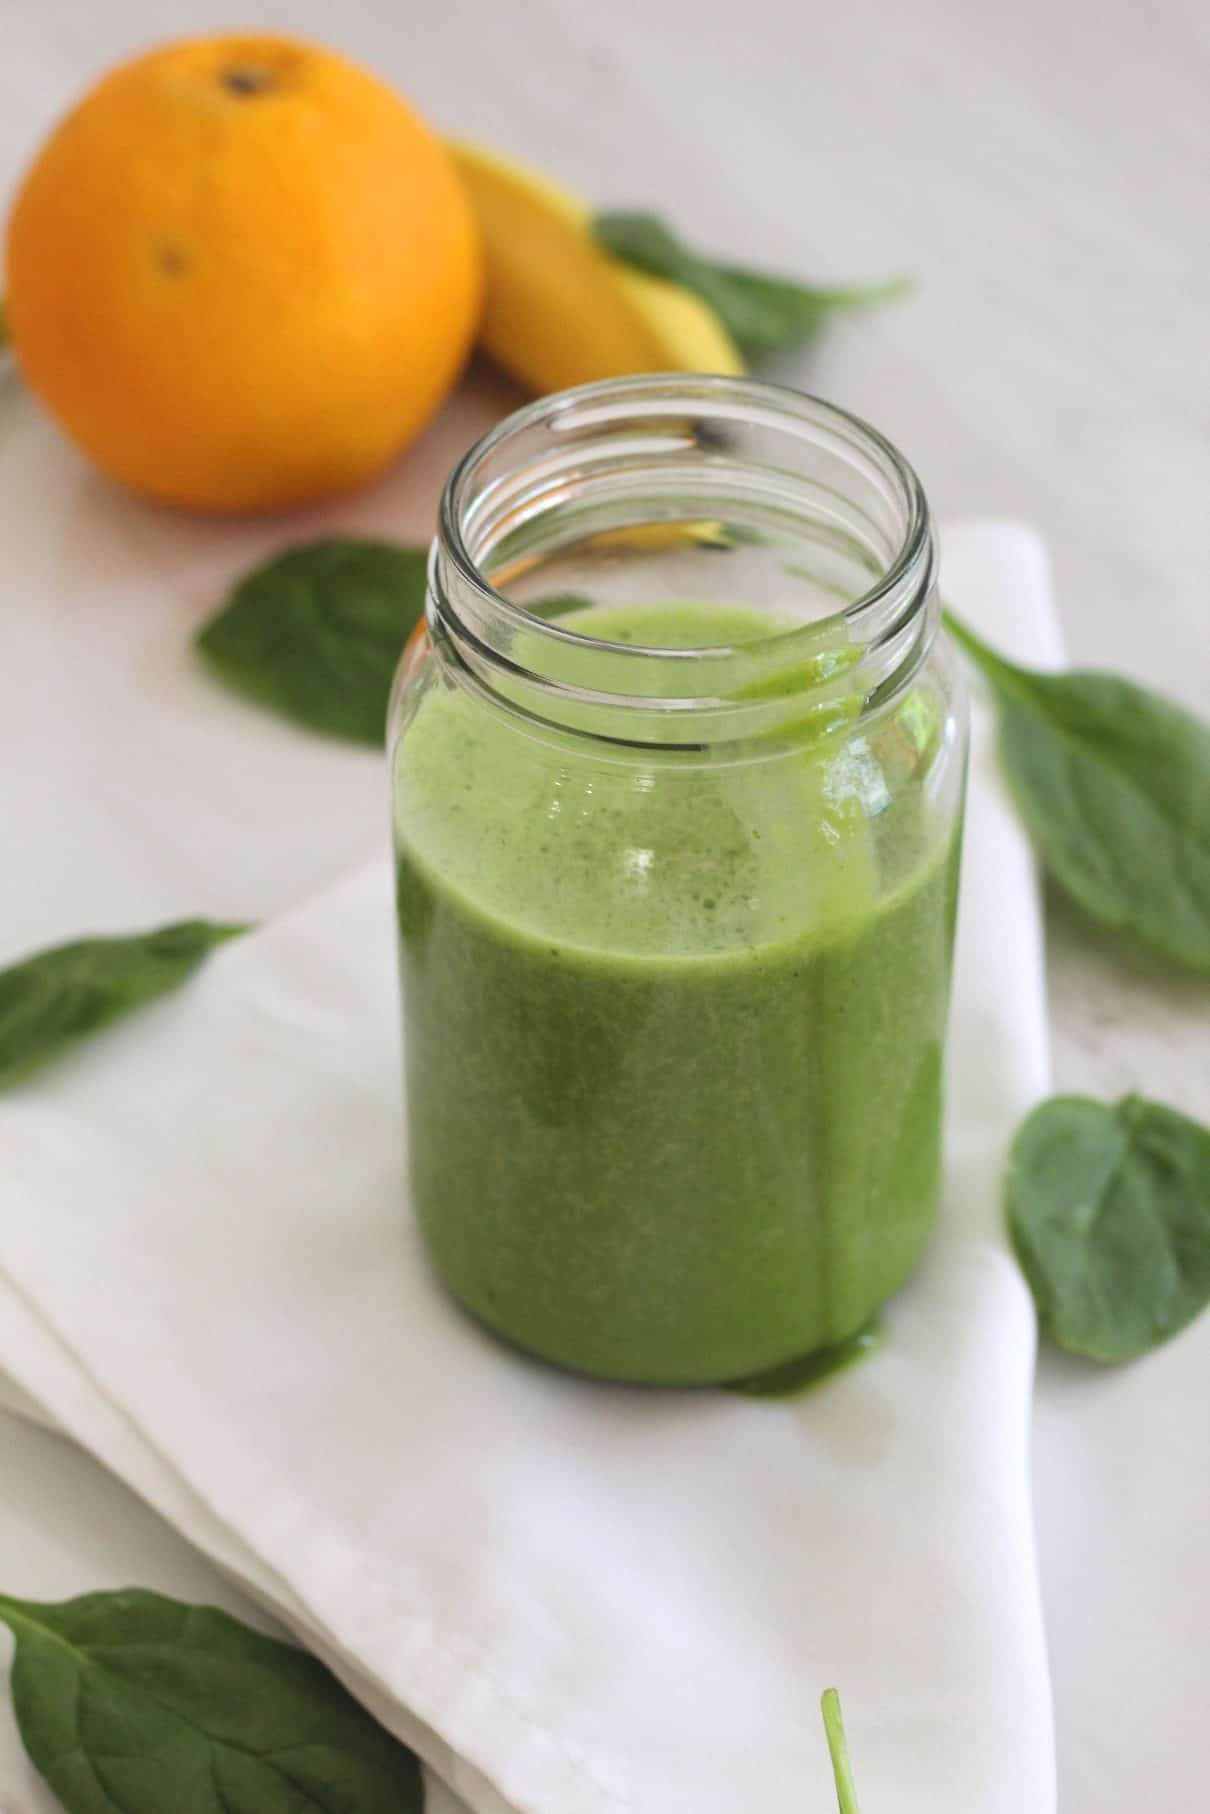 Green smoothie with spinach, orange, banana and oat milk. Jar with smoothie is shown over a white napkin with a trail of smoothie spilling over the side of the jar.